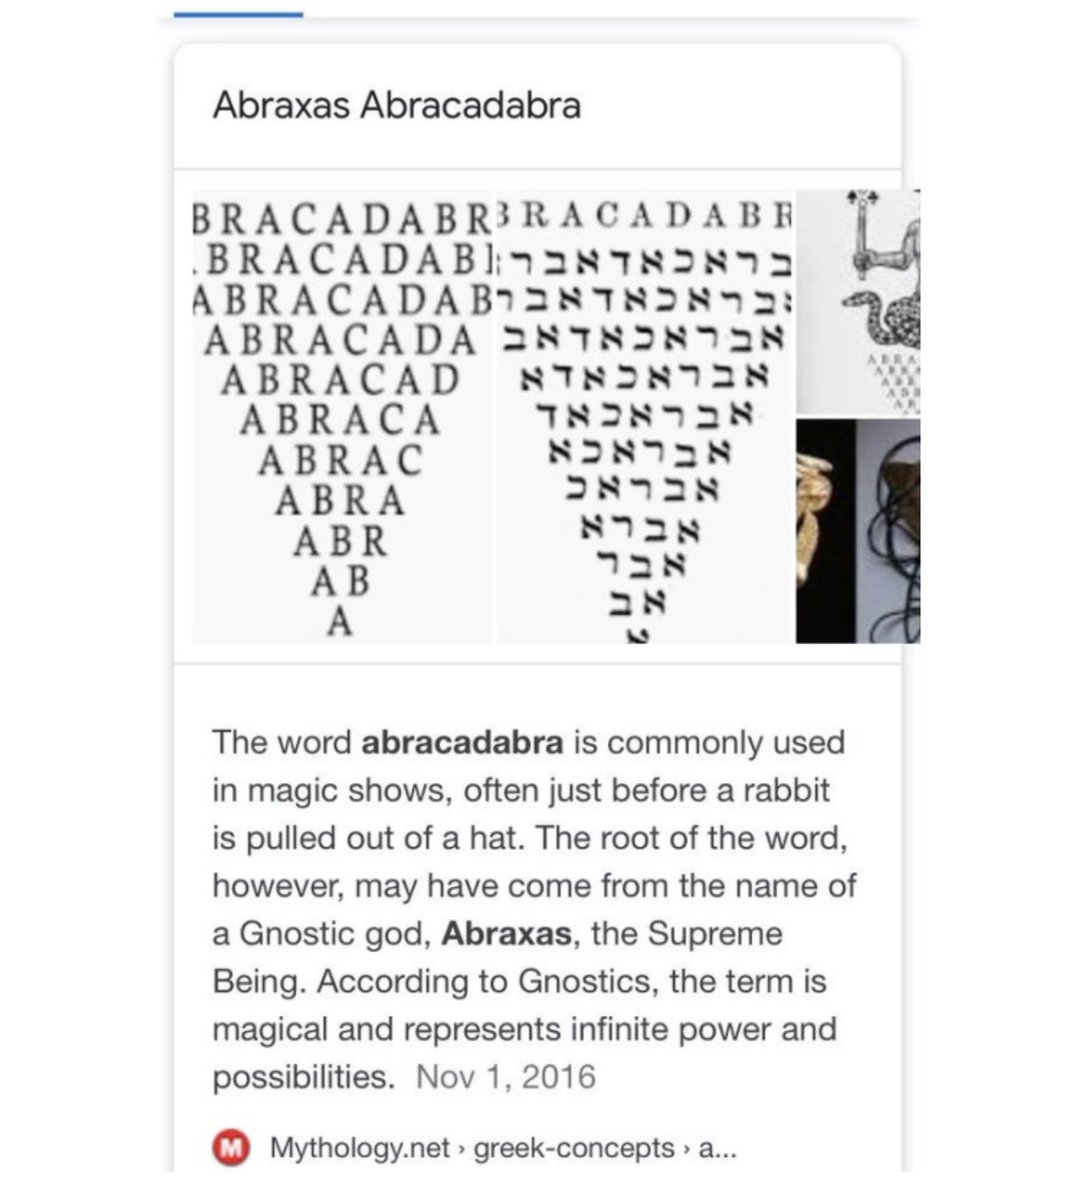 The part about the word Abrcadabra originating from Abraxas got cut off, so here it is: